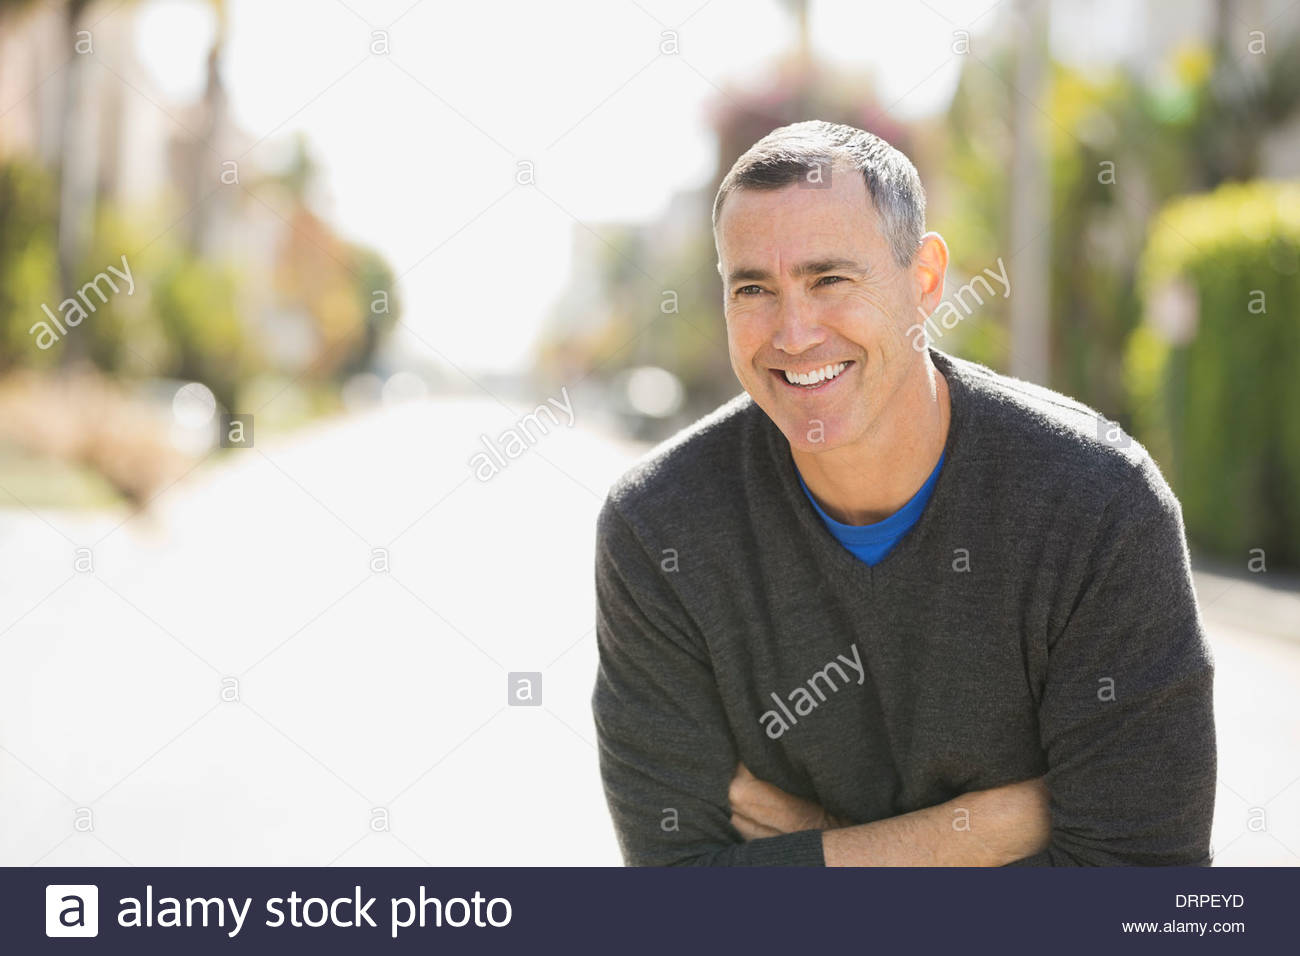 Man with arms crossed standing on street Stock Photo